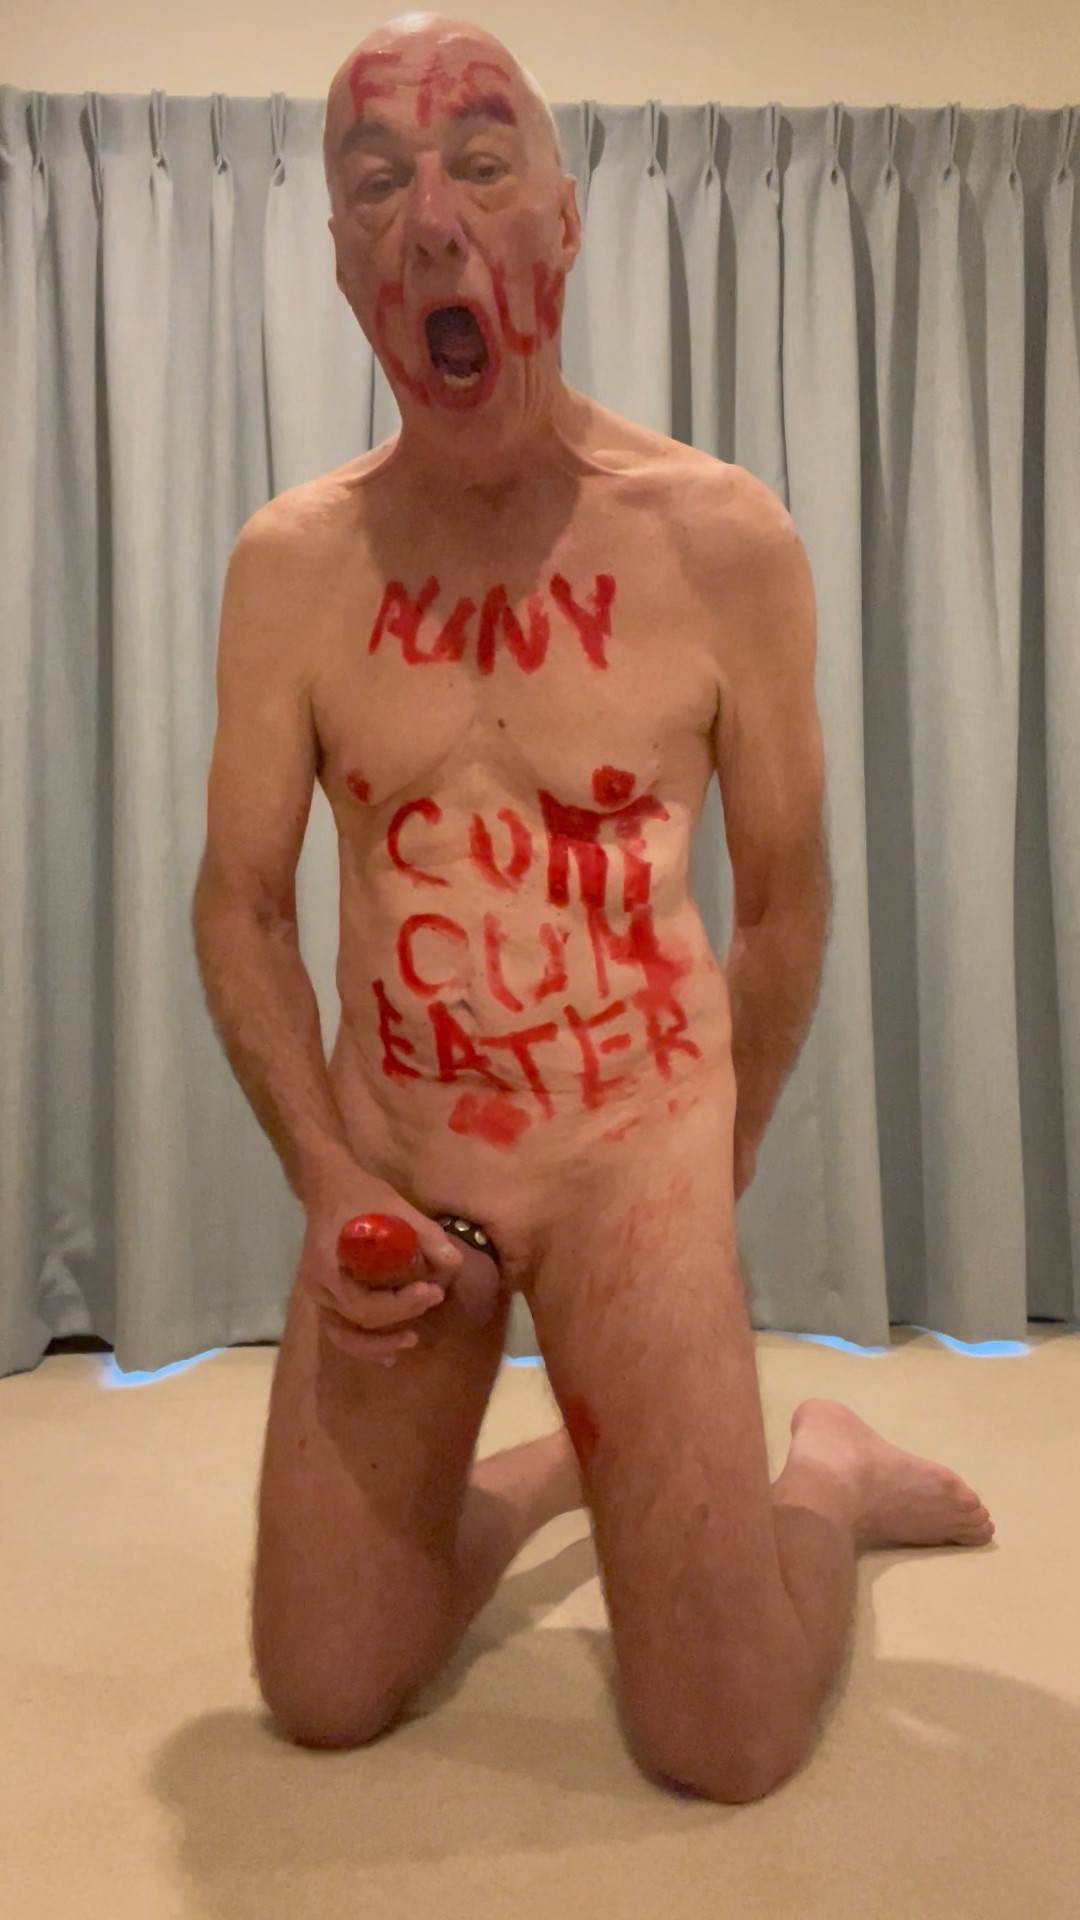 punyc*nt performs a jerk off and cum eating show for the camera (Part 1)